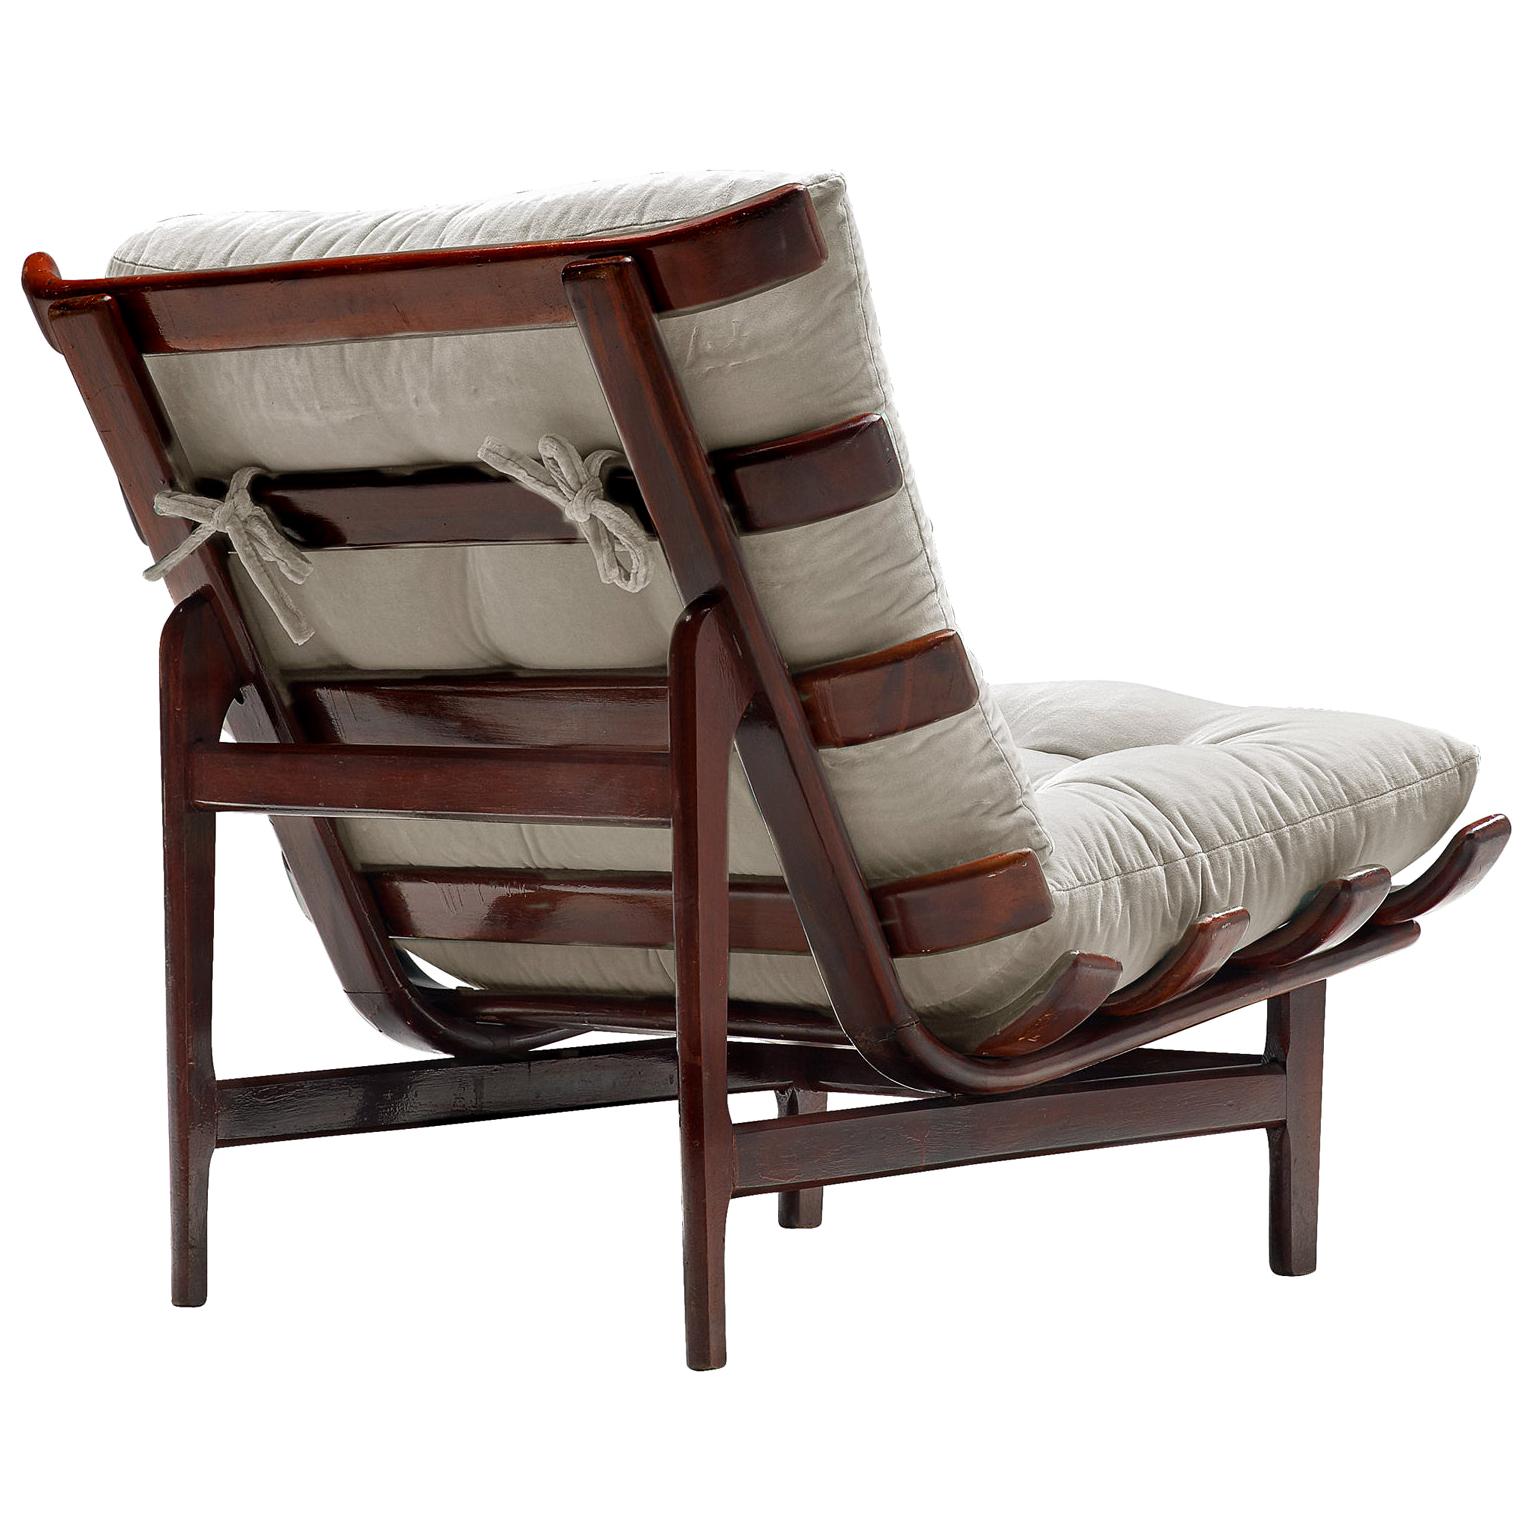 Lounge Chair in Solid Rosewood Frame by Móveis Pailar.